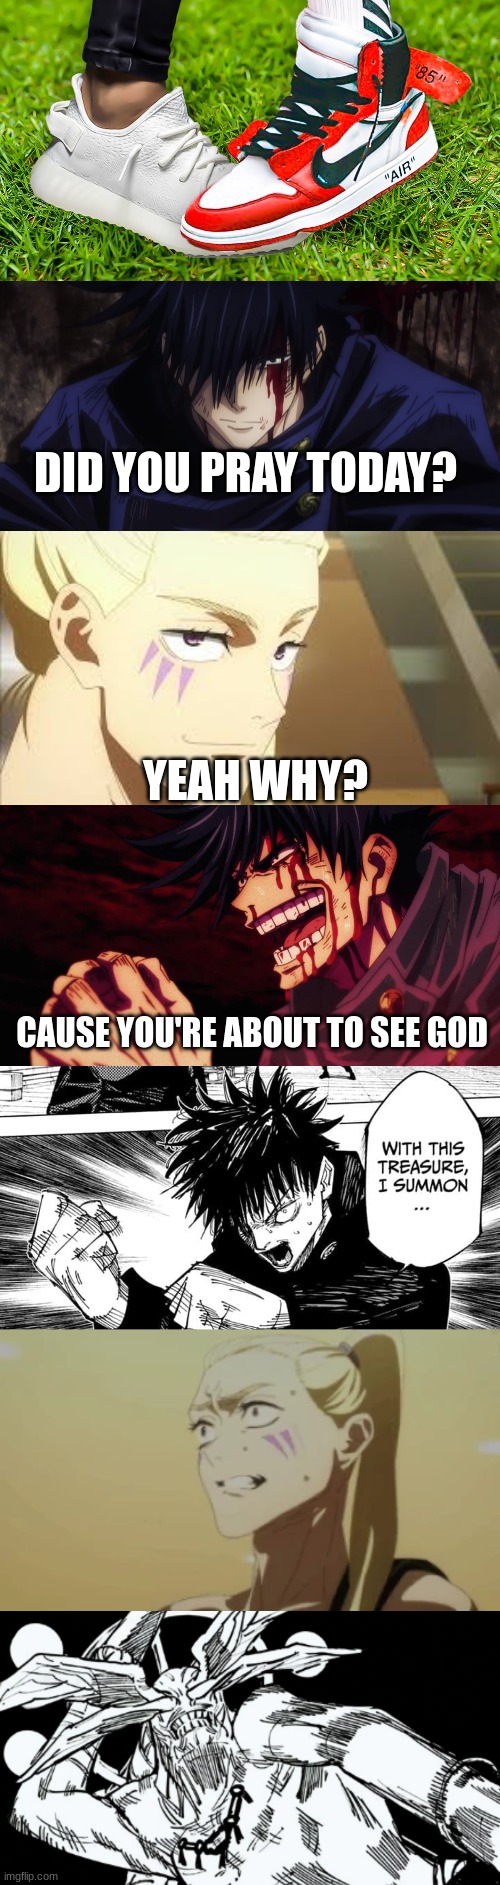 It's just a prank bro | DID YOU PRAY TODAY? YEAH WHY? CAUSE YOU'RE ABOUT TO SEE GOD | image tagged in memes,help,anime,divine,fate,jordan | made w/ Imgflip meme maker